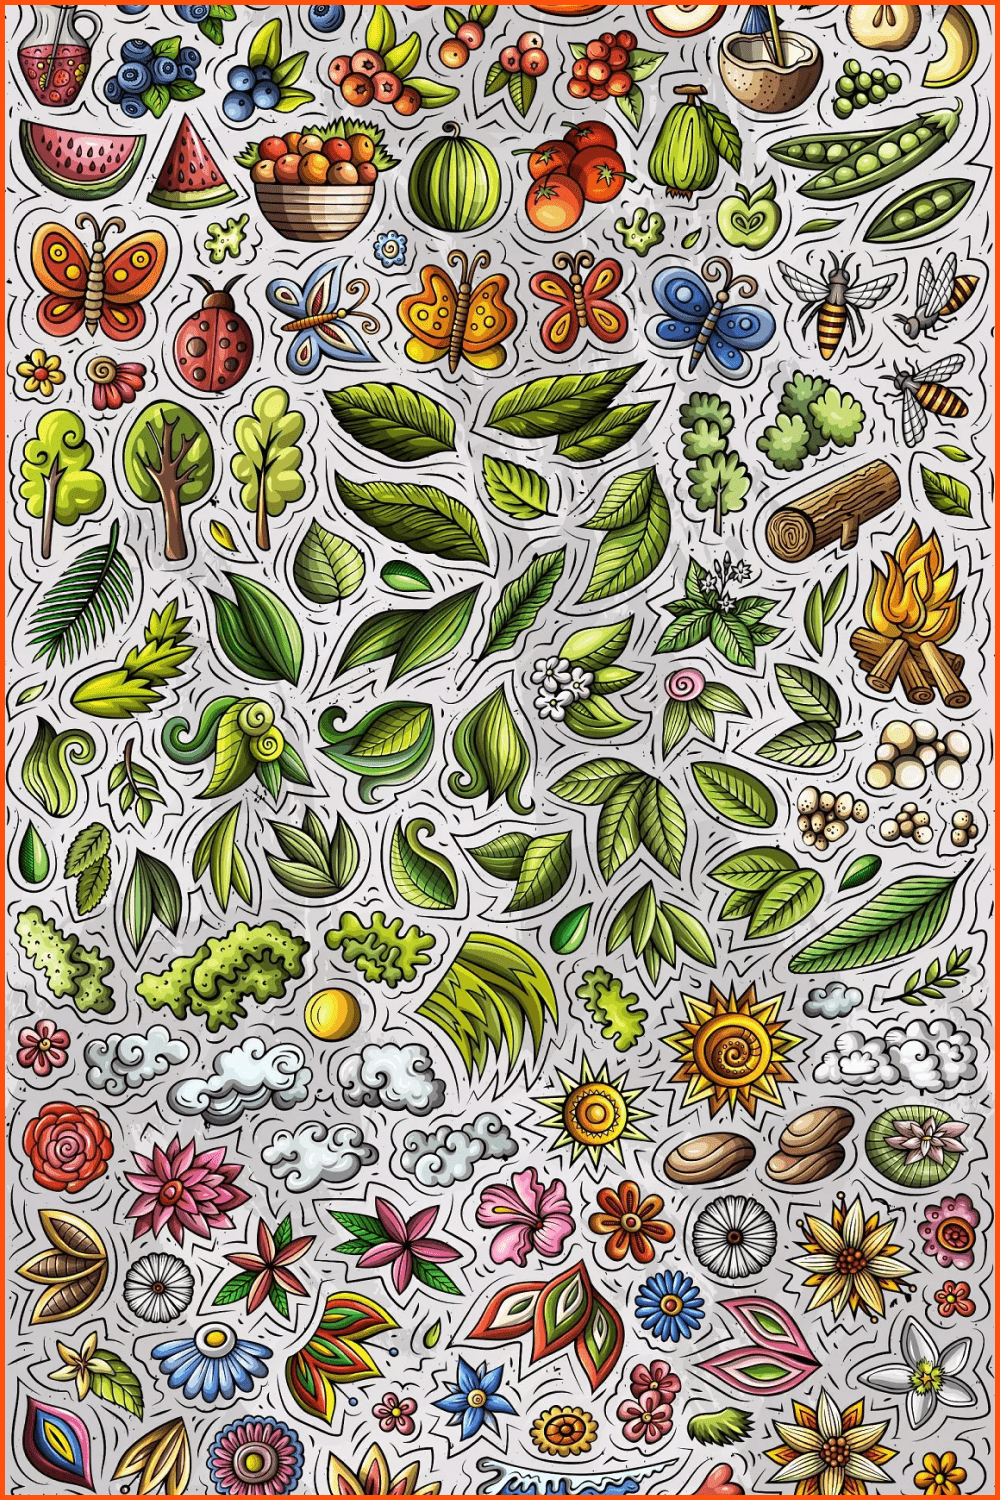 Doodles with insects, fruits, leaves, and berries.